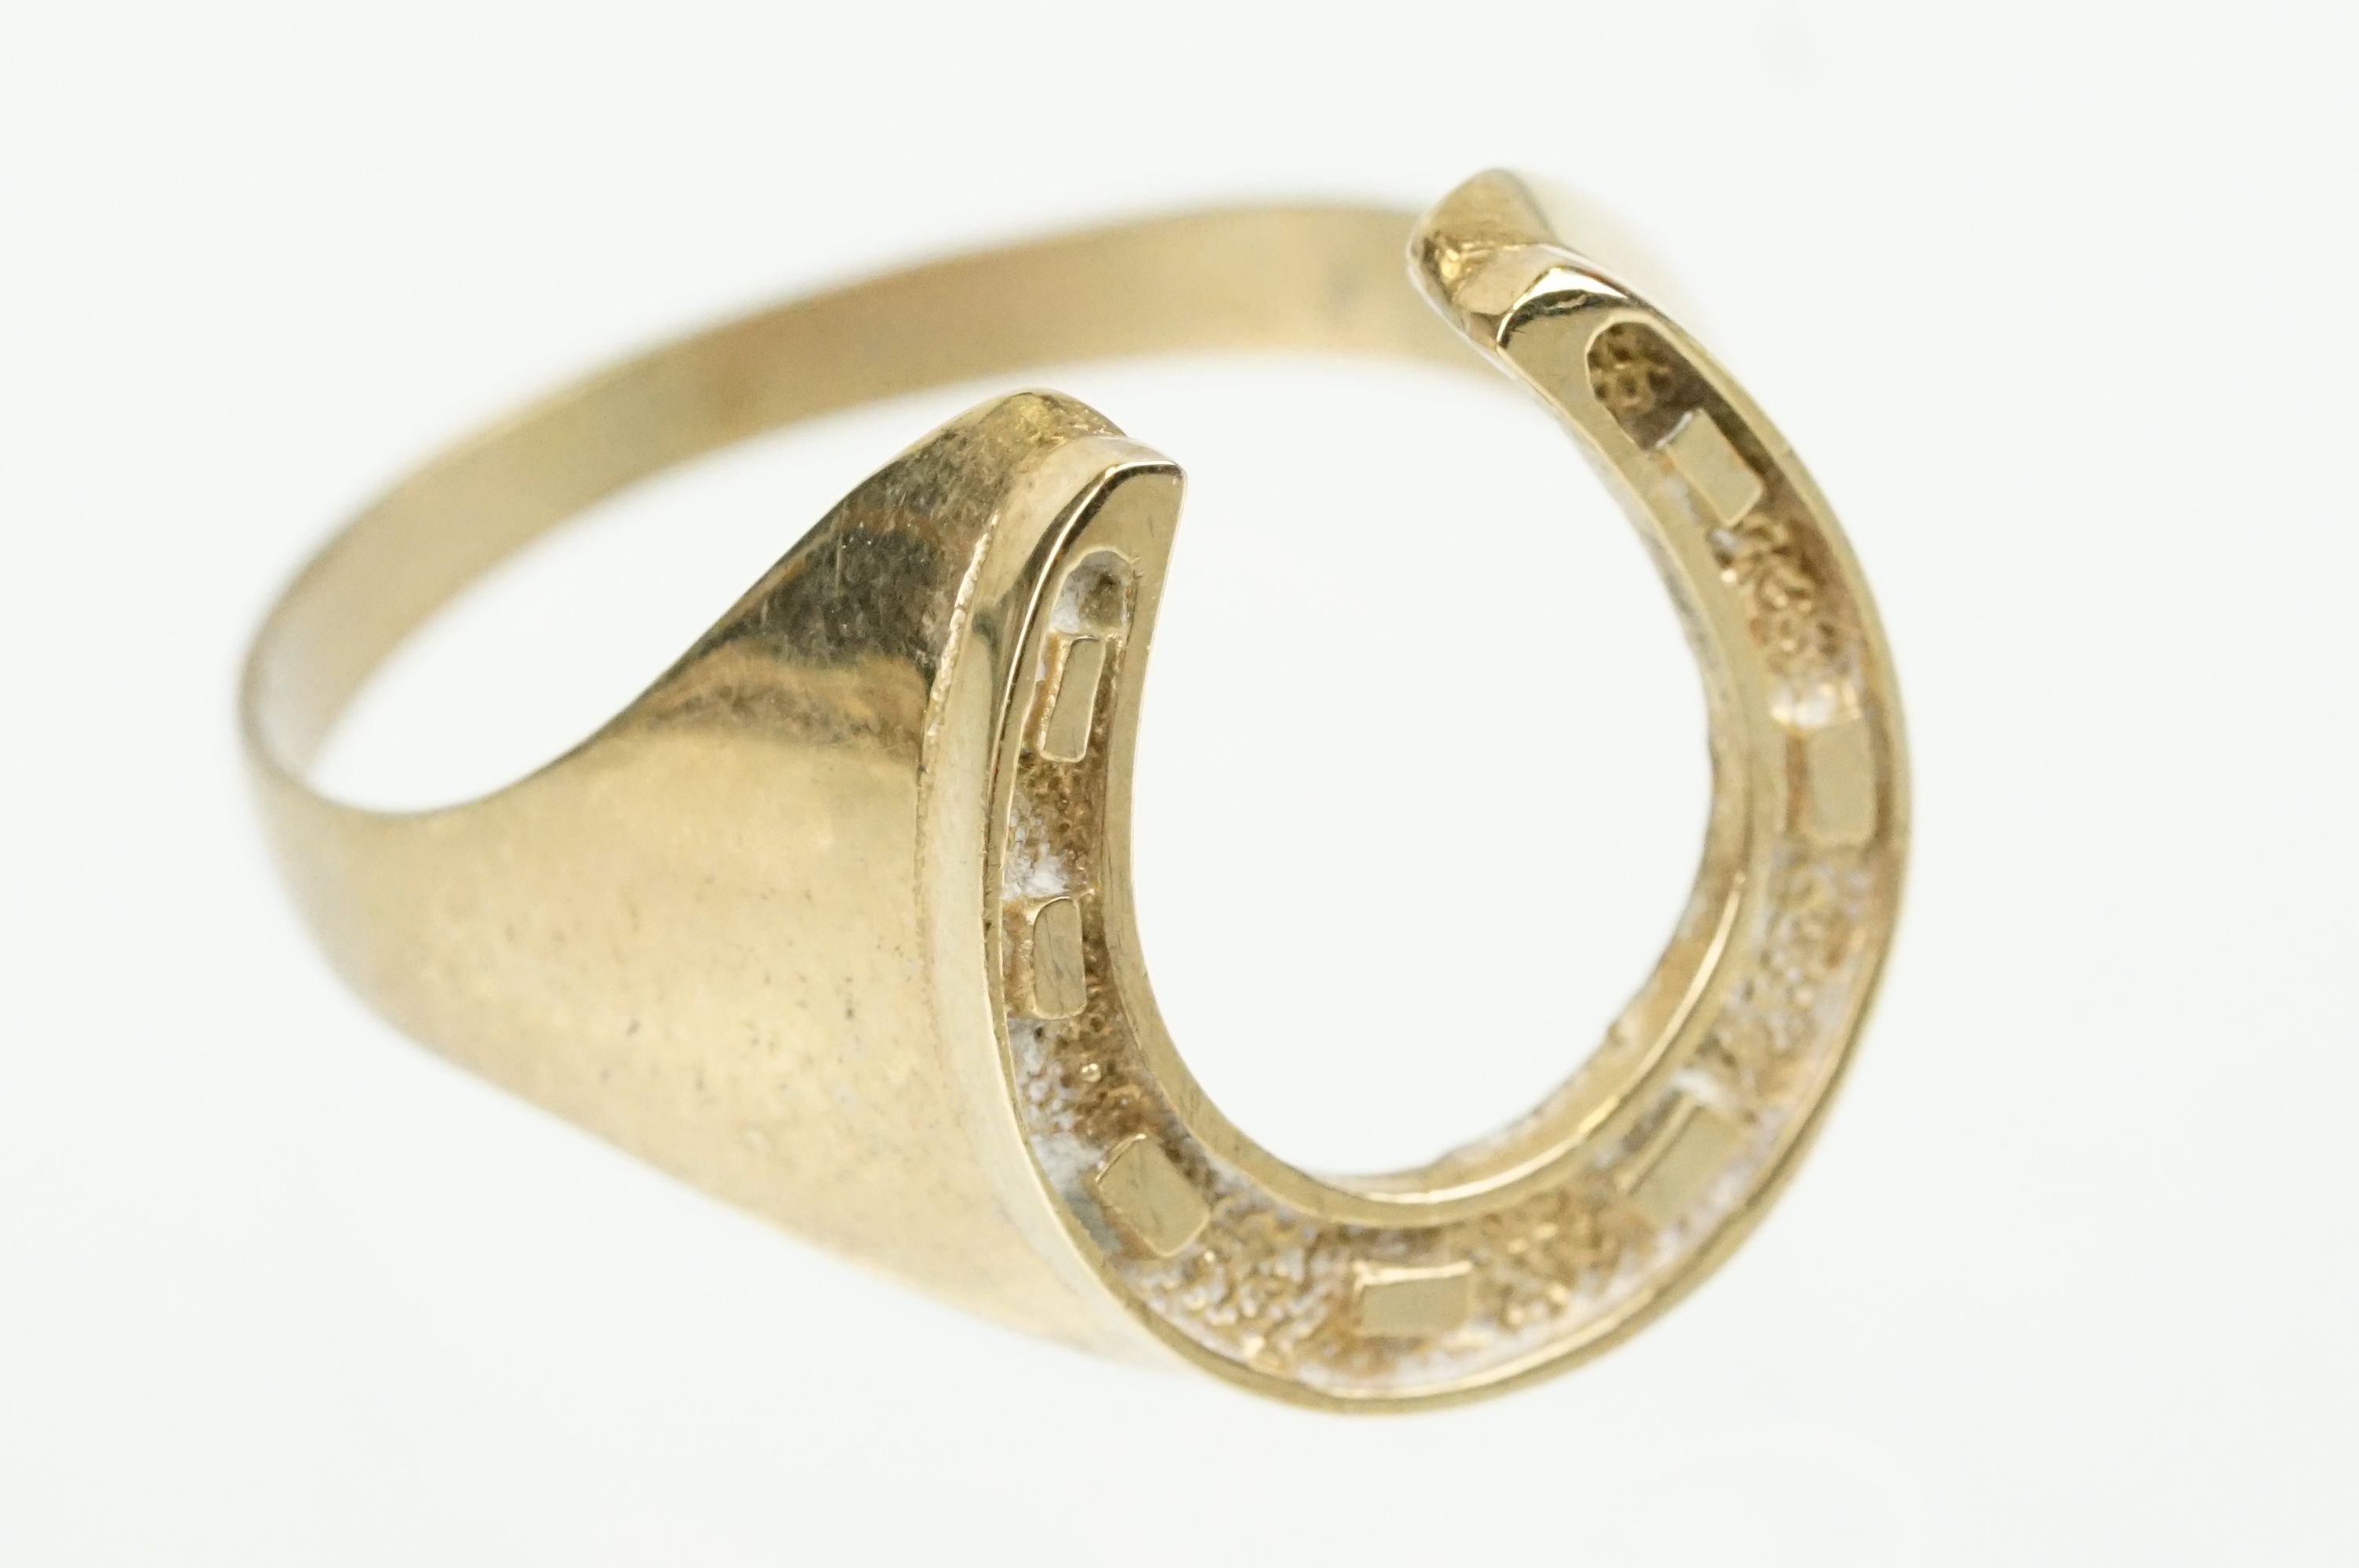 9ct gold horse shoe ring with moulded details. Hallmarked present but rubbed. Size S.5.